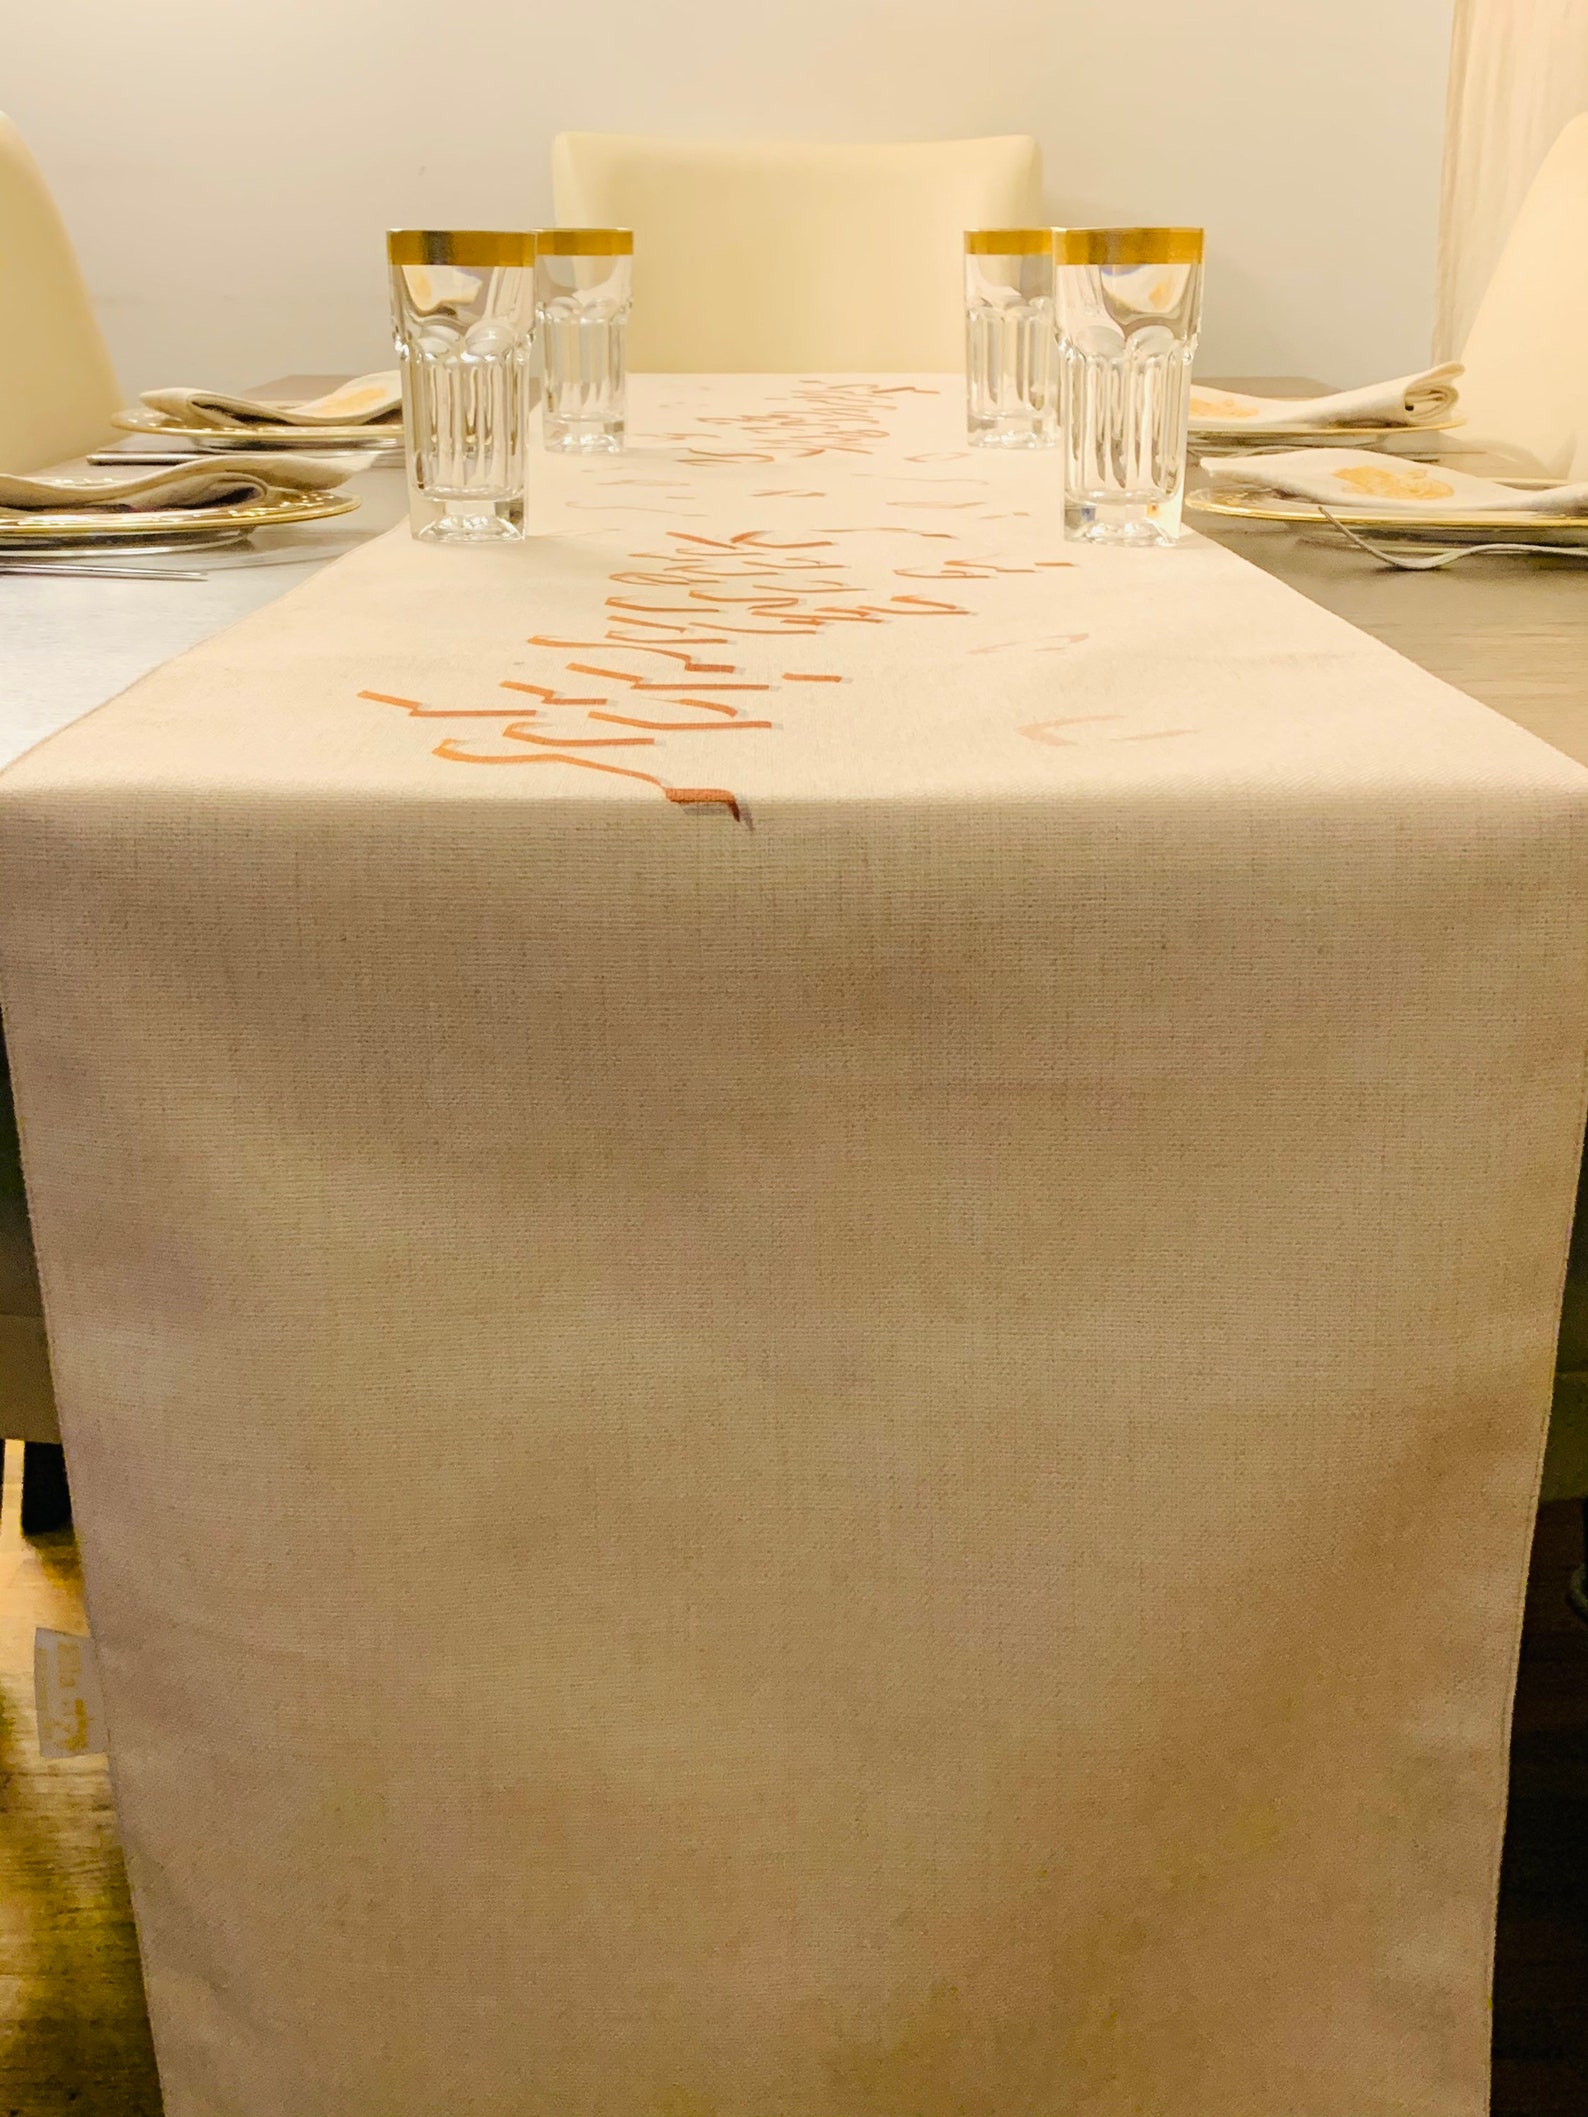 Lecha Dodi Table Runner Linen Cotton Blend With Printed - Etsy